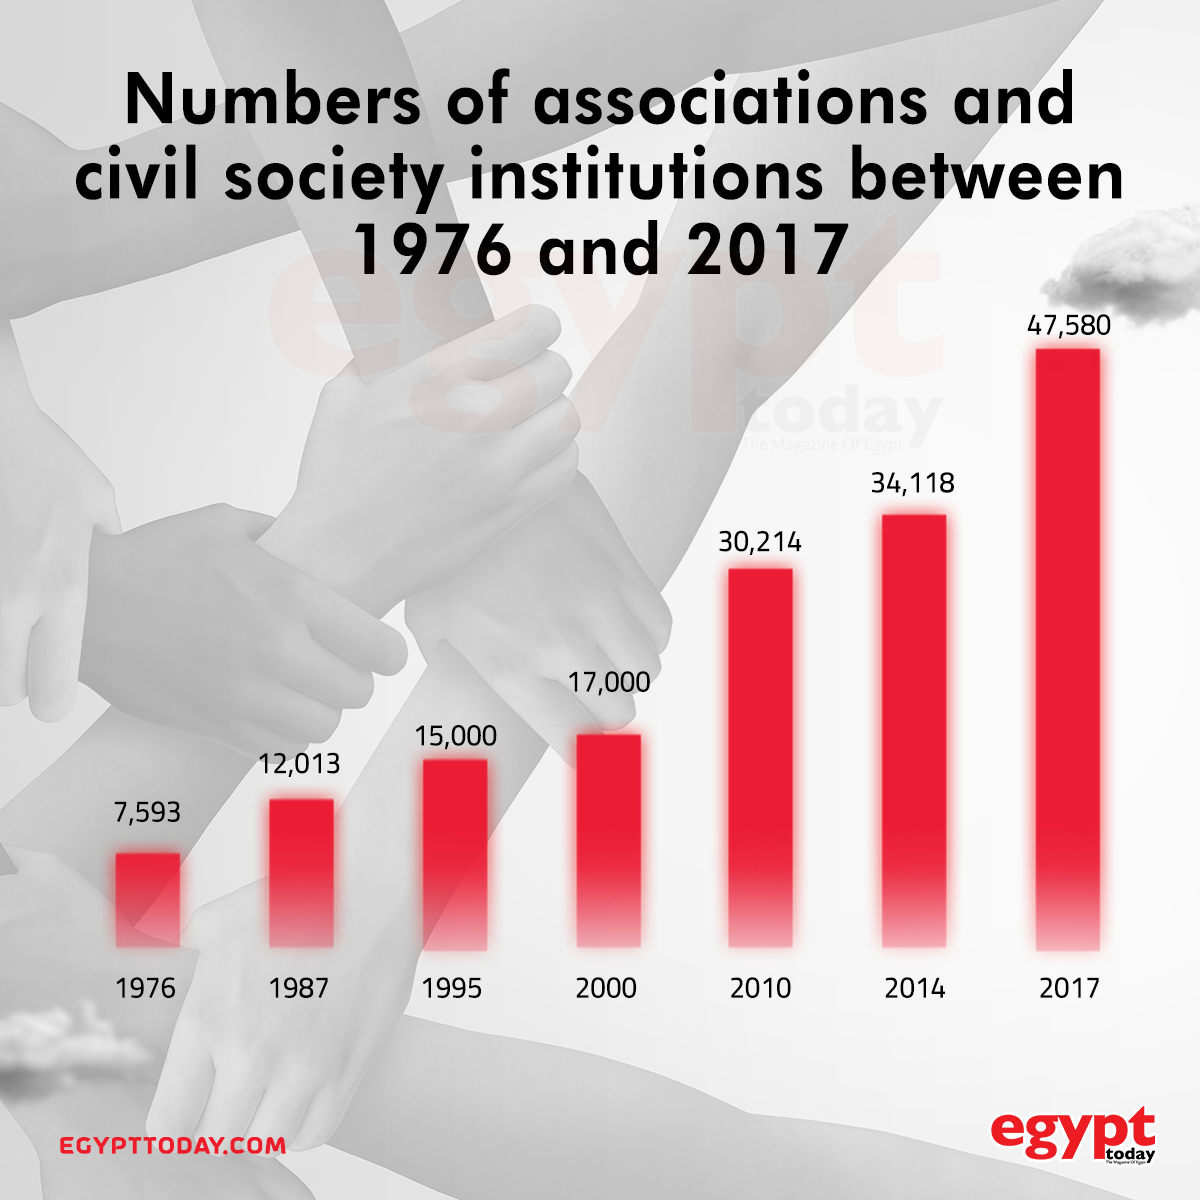 Numbers of associations and civil society institutions between 1976 and 2017